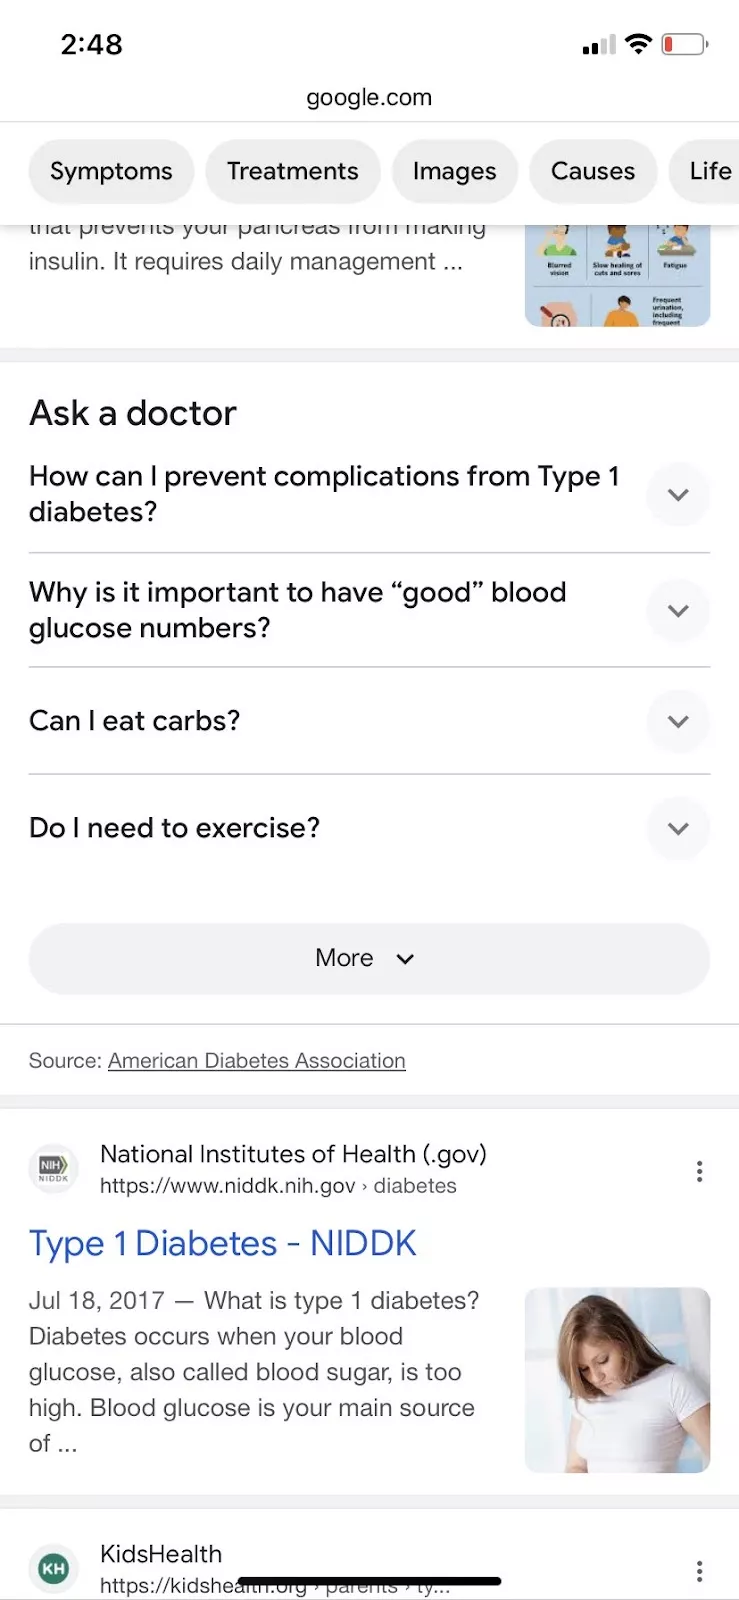 Ask a doctor feature